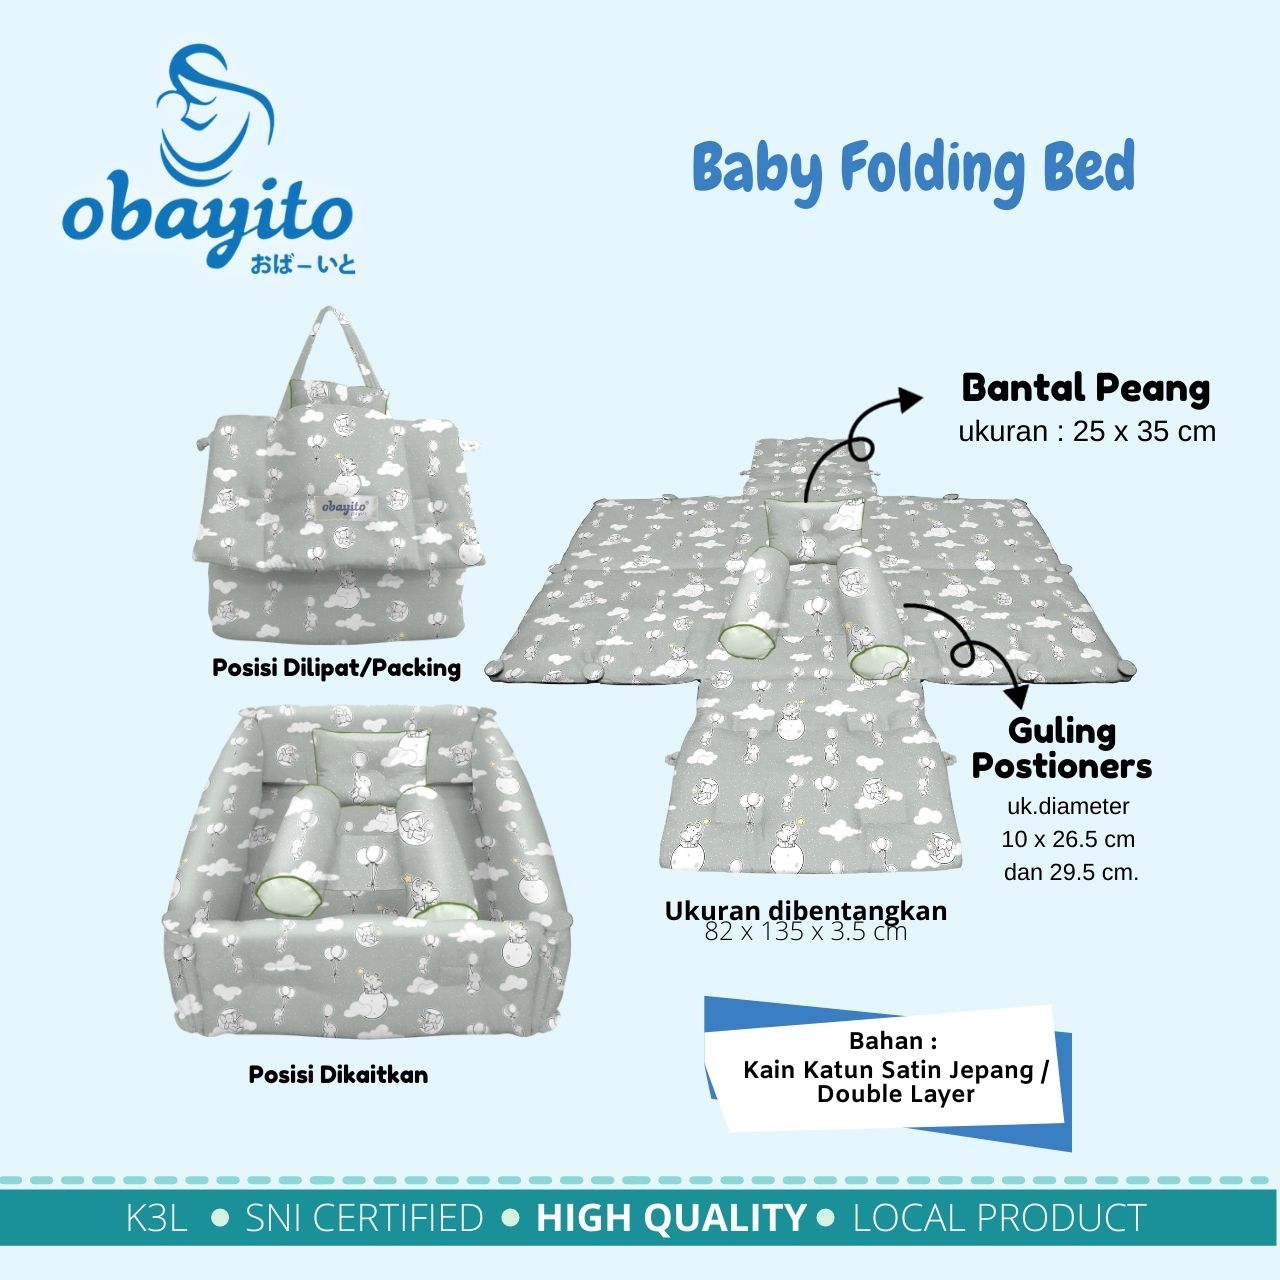 Baby Folding Bed